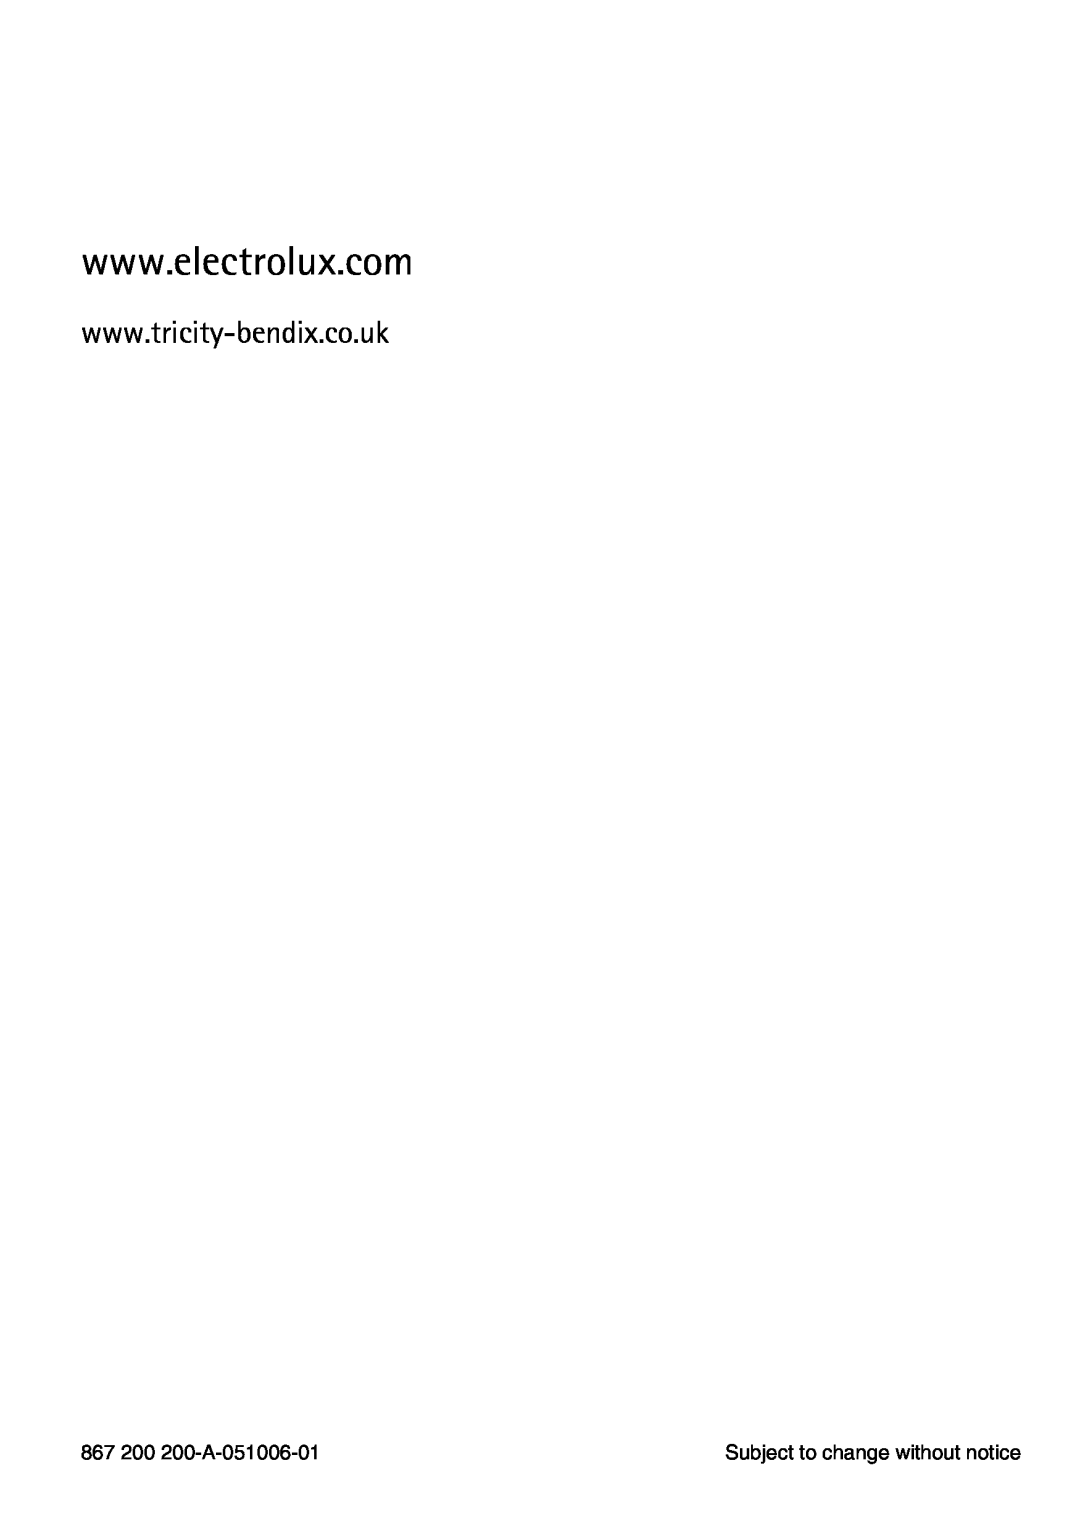 Electrolux TBC 651 X installation instructions 867 200 200-A-051006-01, Subject to change without notice 